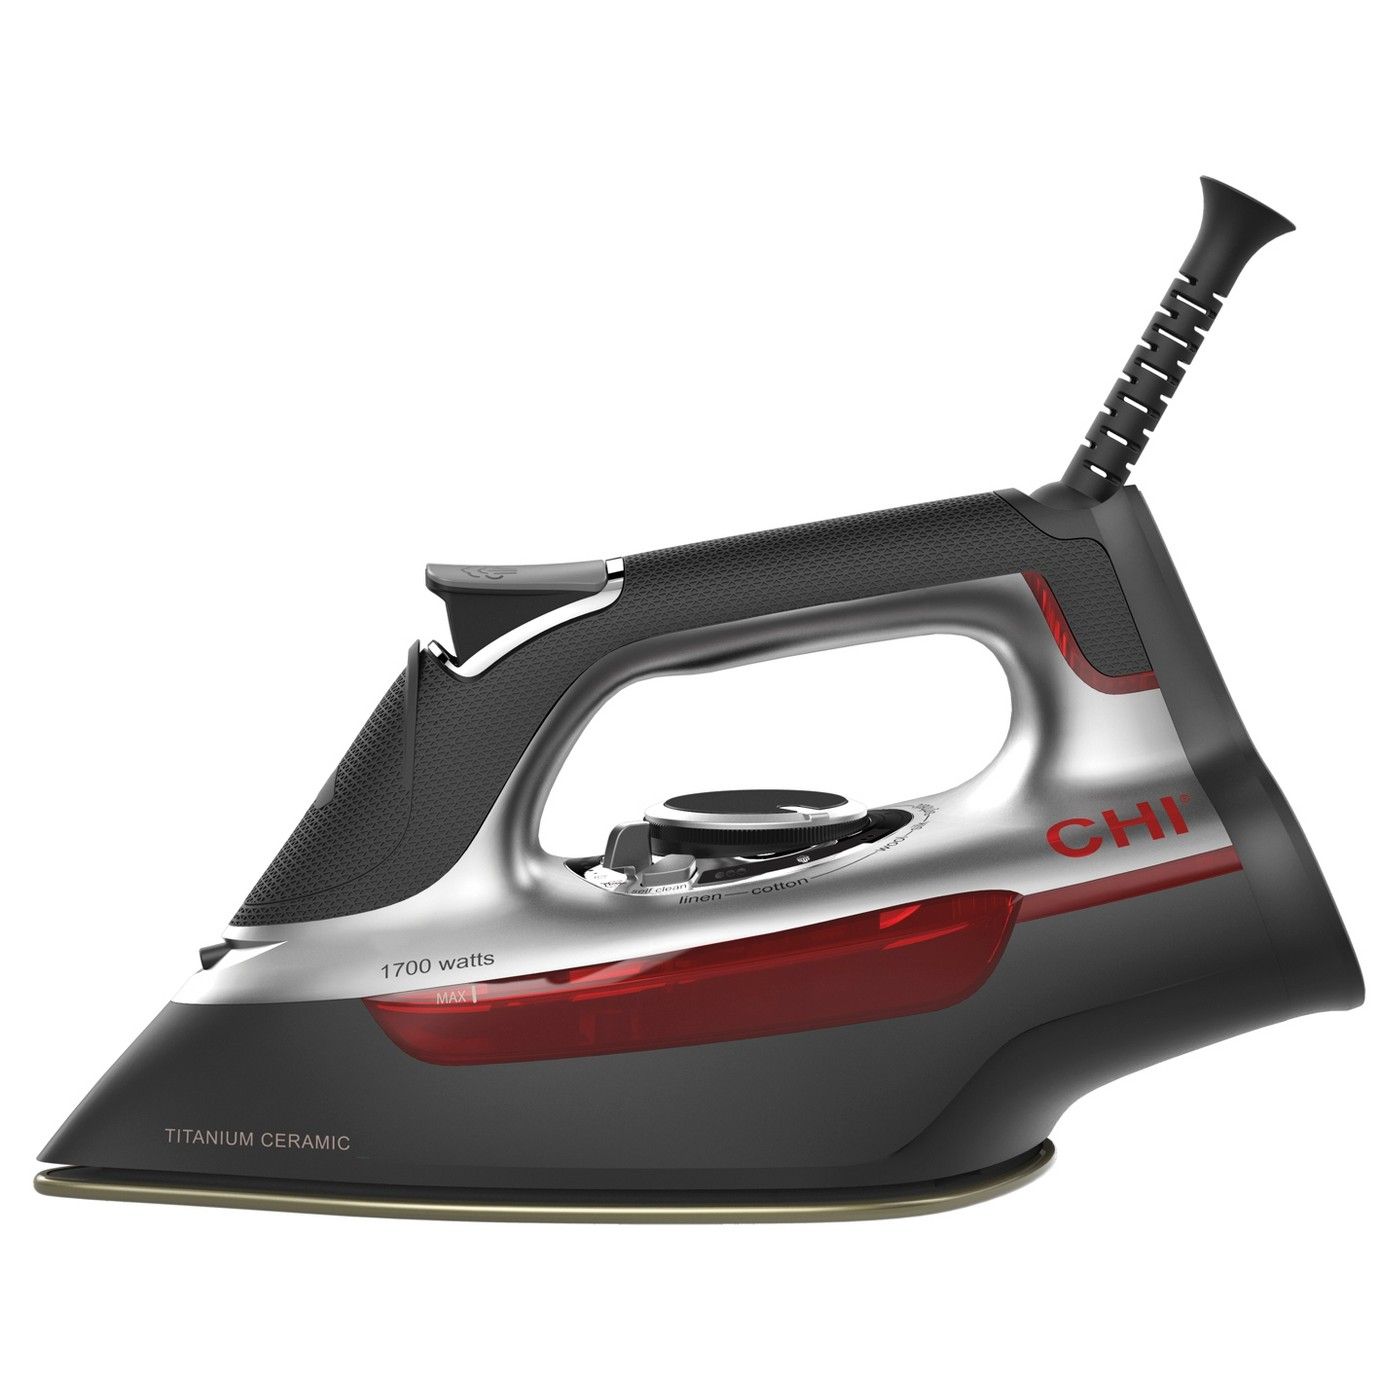 CHI 13101 Professional Steam Iron with Titanium Infused Ceramic Soleplate, Silver Gray (New Open Box)